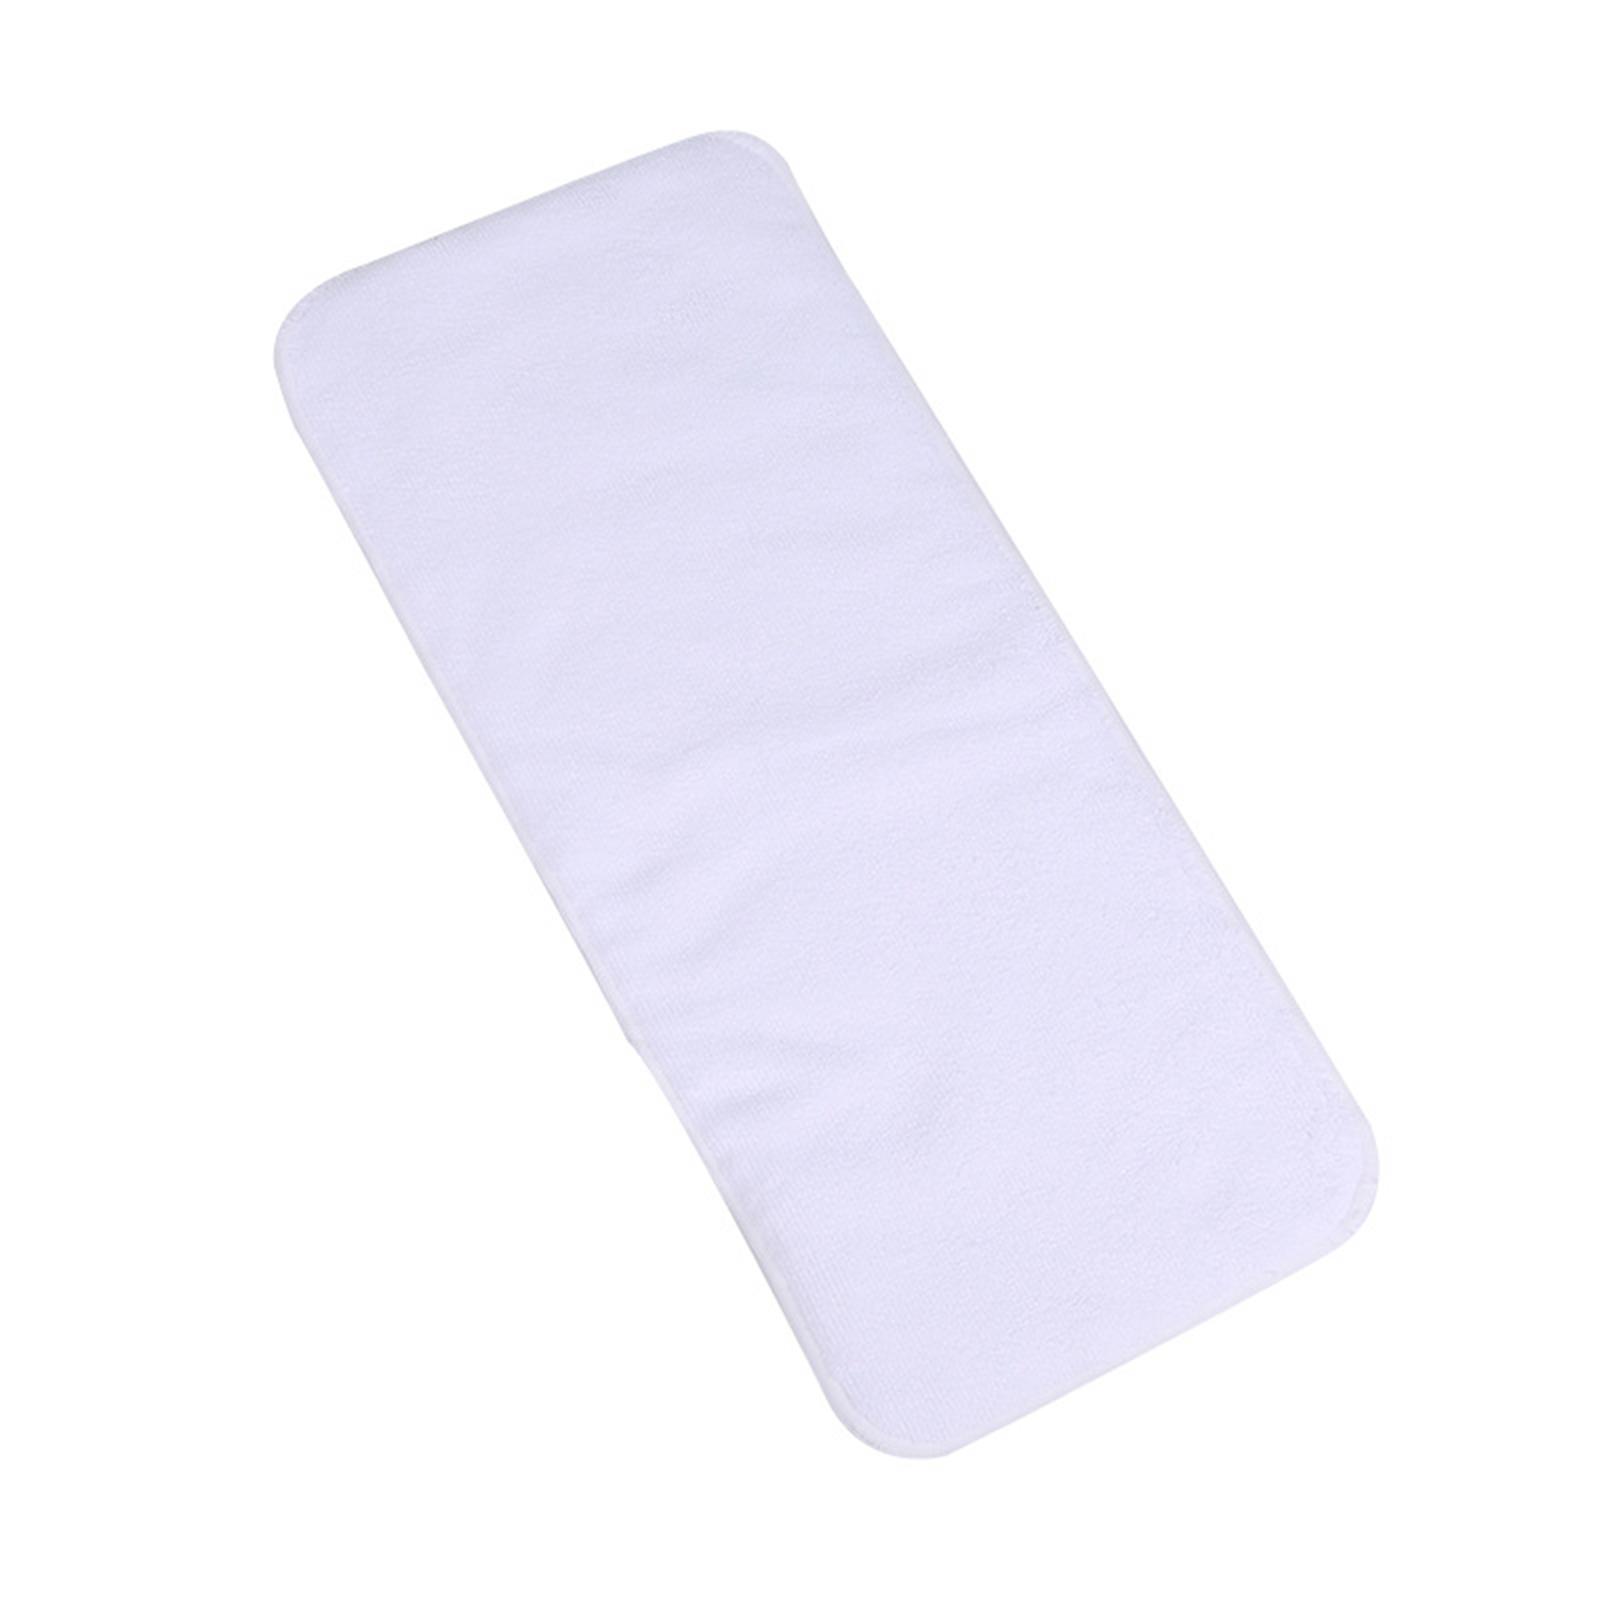 Incontinence Bed Pad Cloth Liner for Diaper Absorbent Cloth Adult Diaper Pad